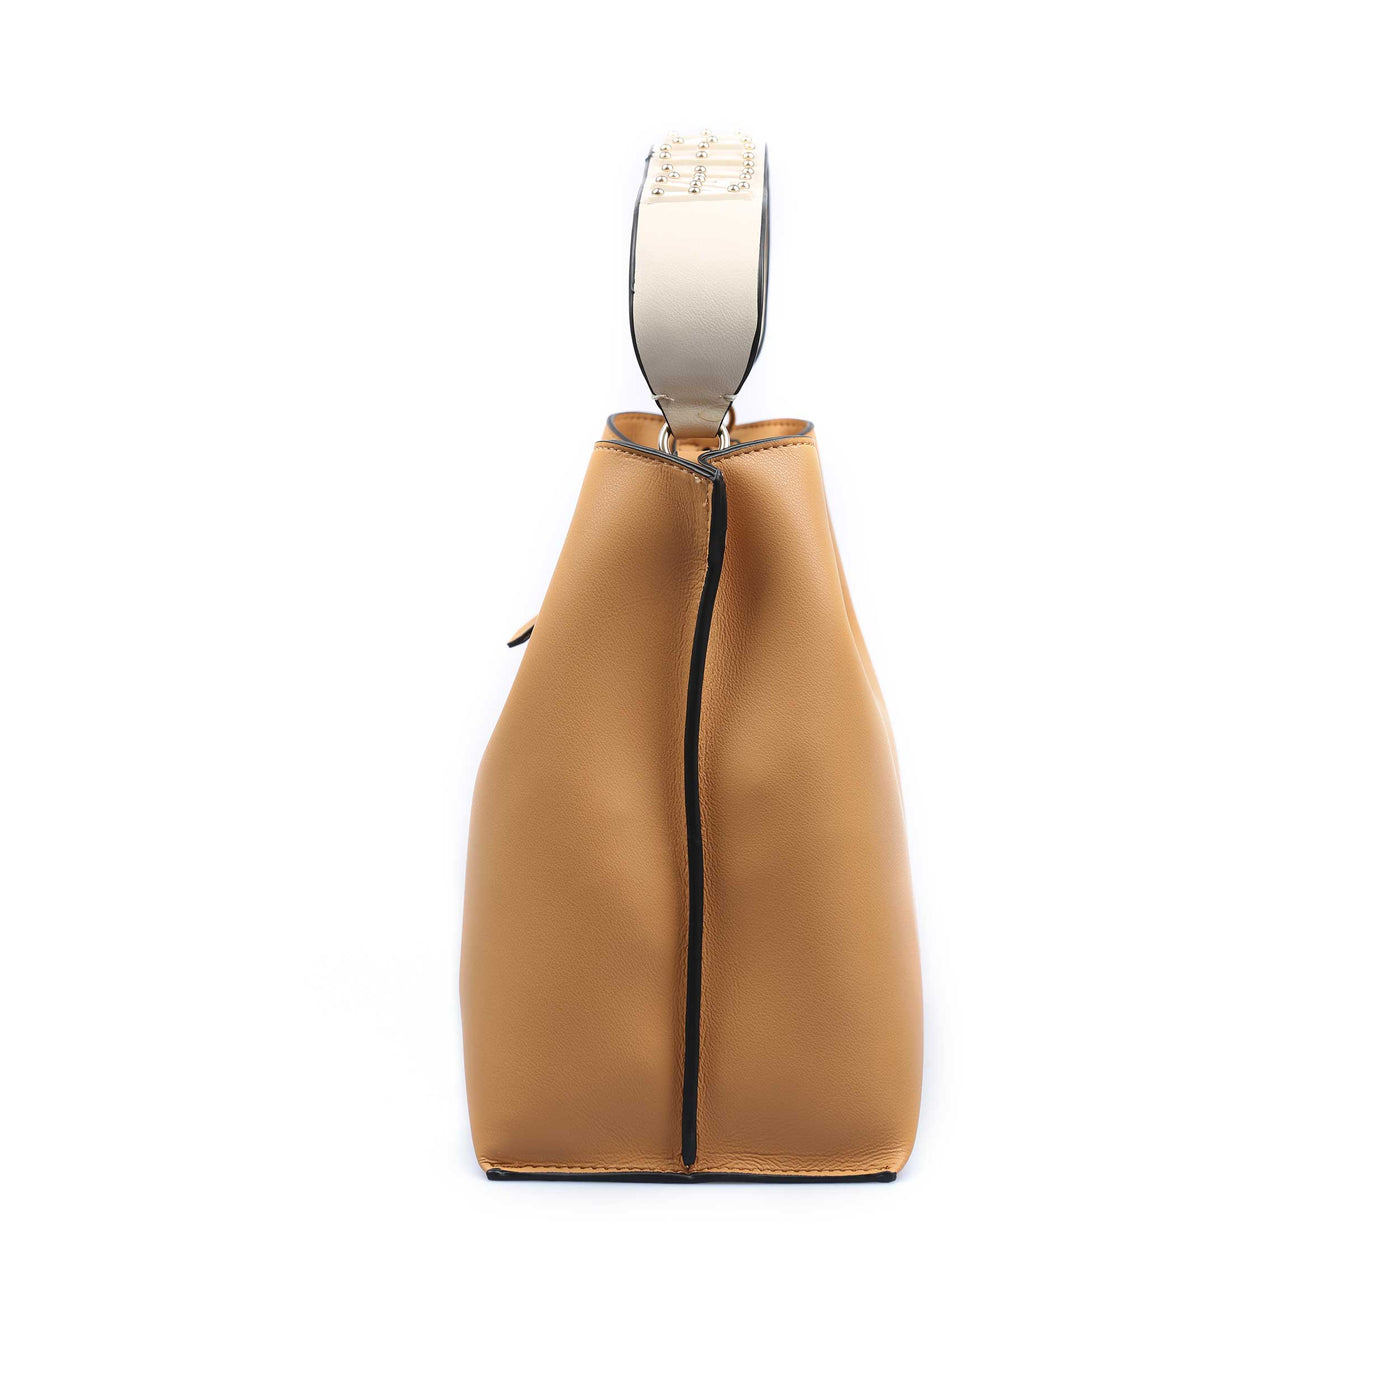 Valentino Bags Sour Large Tote Bag in Camel Ecru